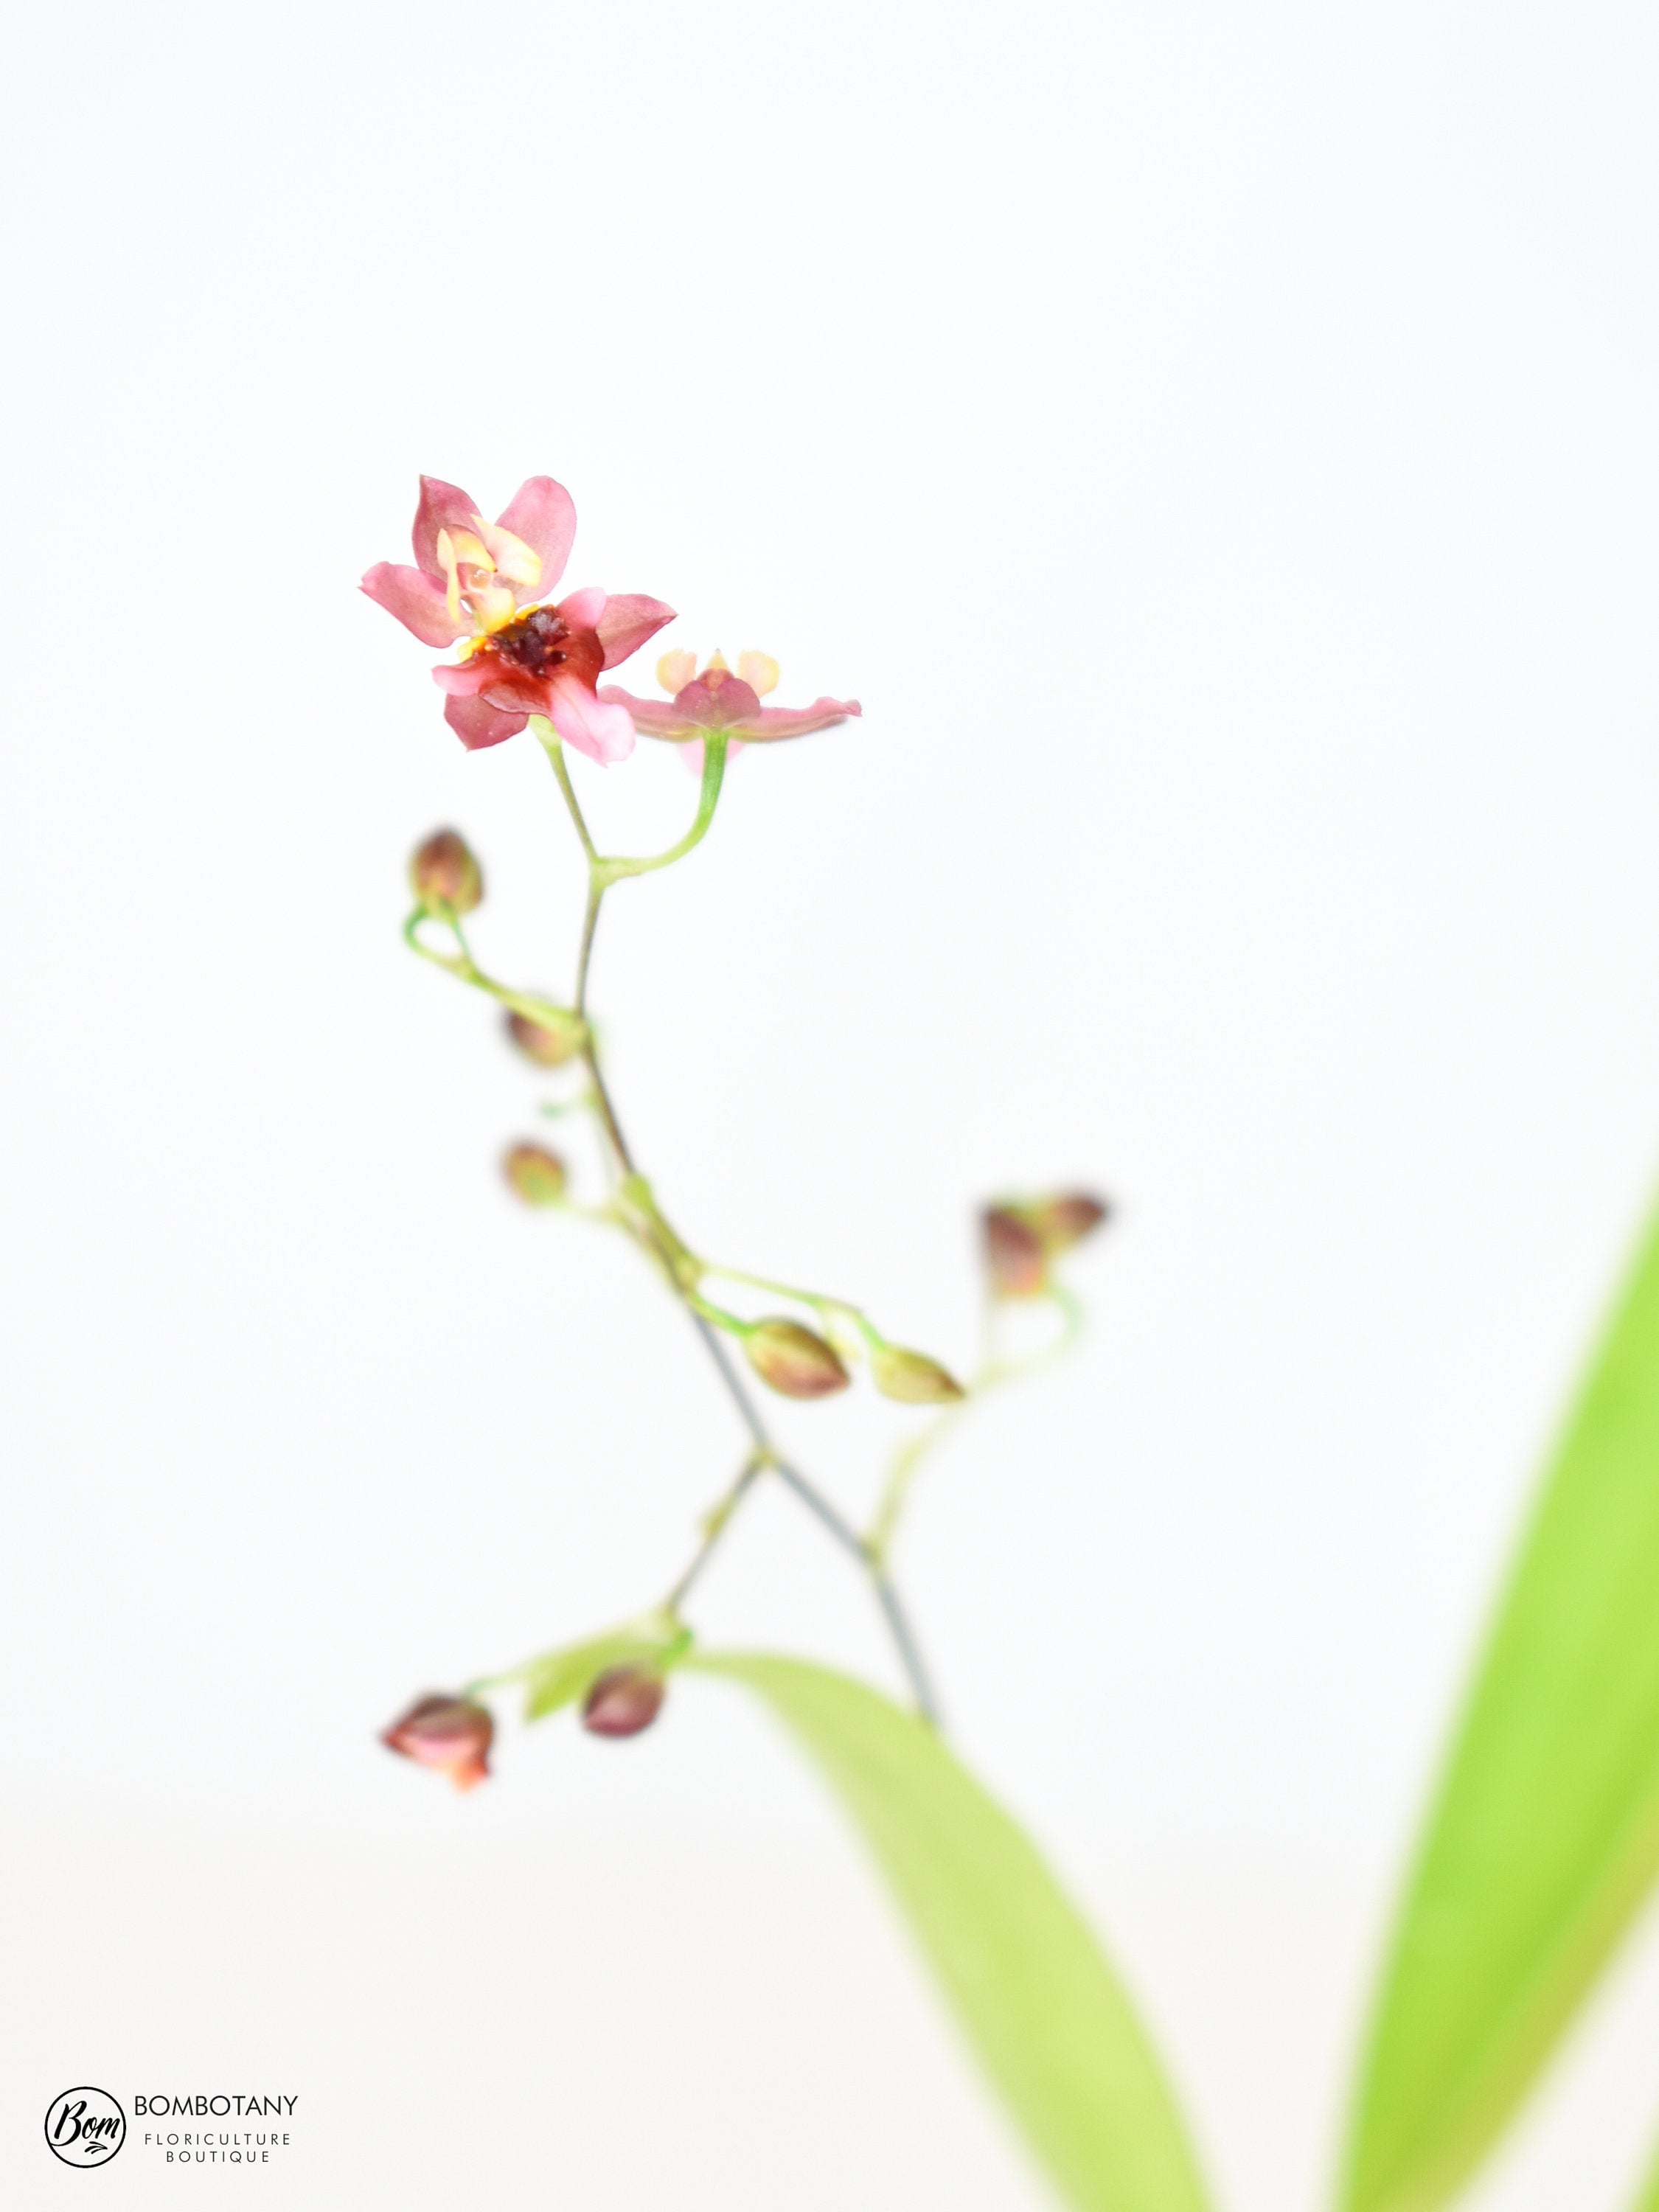 Fragrant Miniature Oncidium Twinkle 'Pink Profusion' IN SPIKE